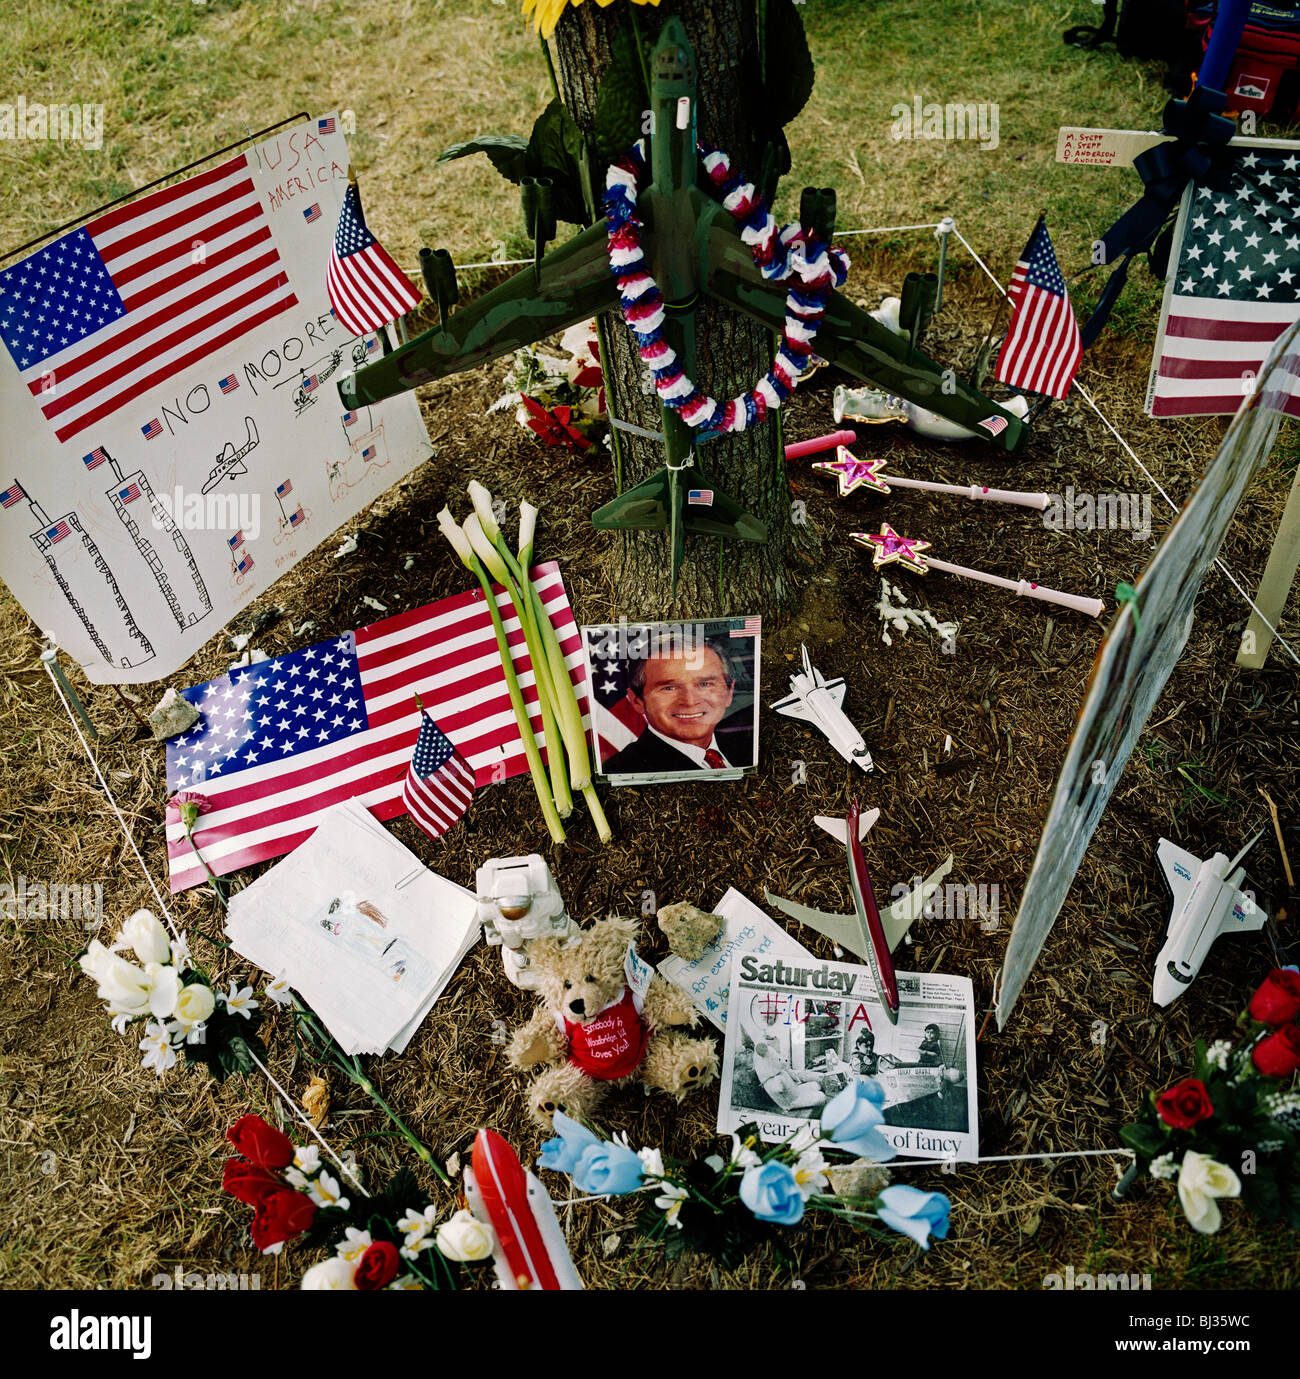 Childrens' memorial of American icons, to those killed and missing after the 9/11 terrorist attacks. Stock Photo